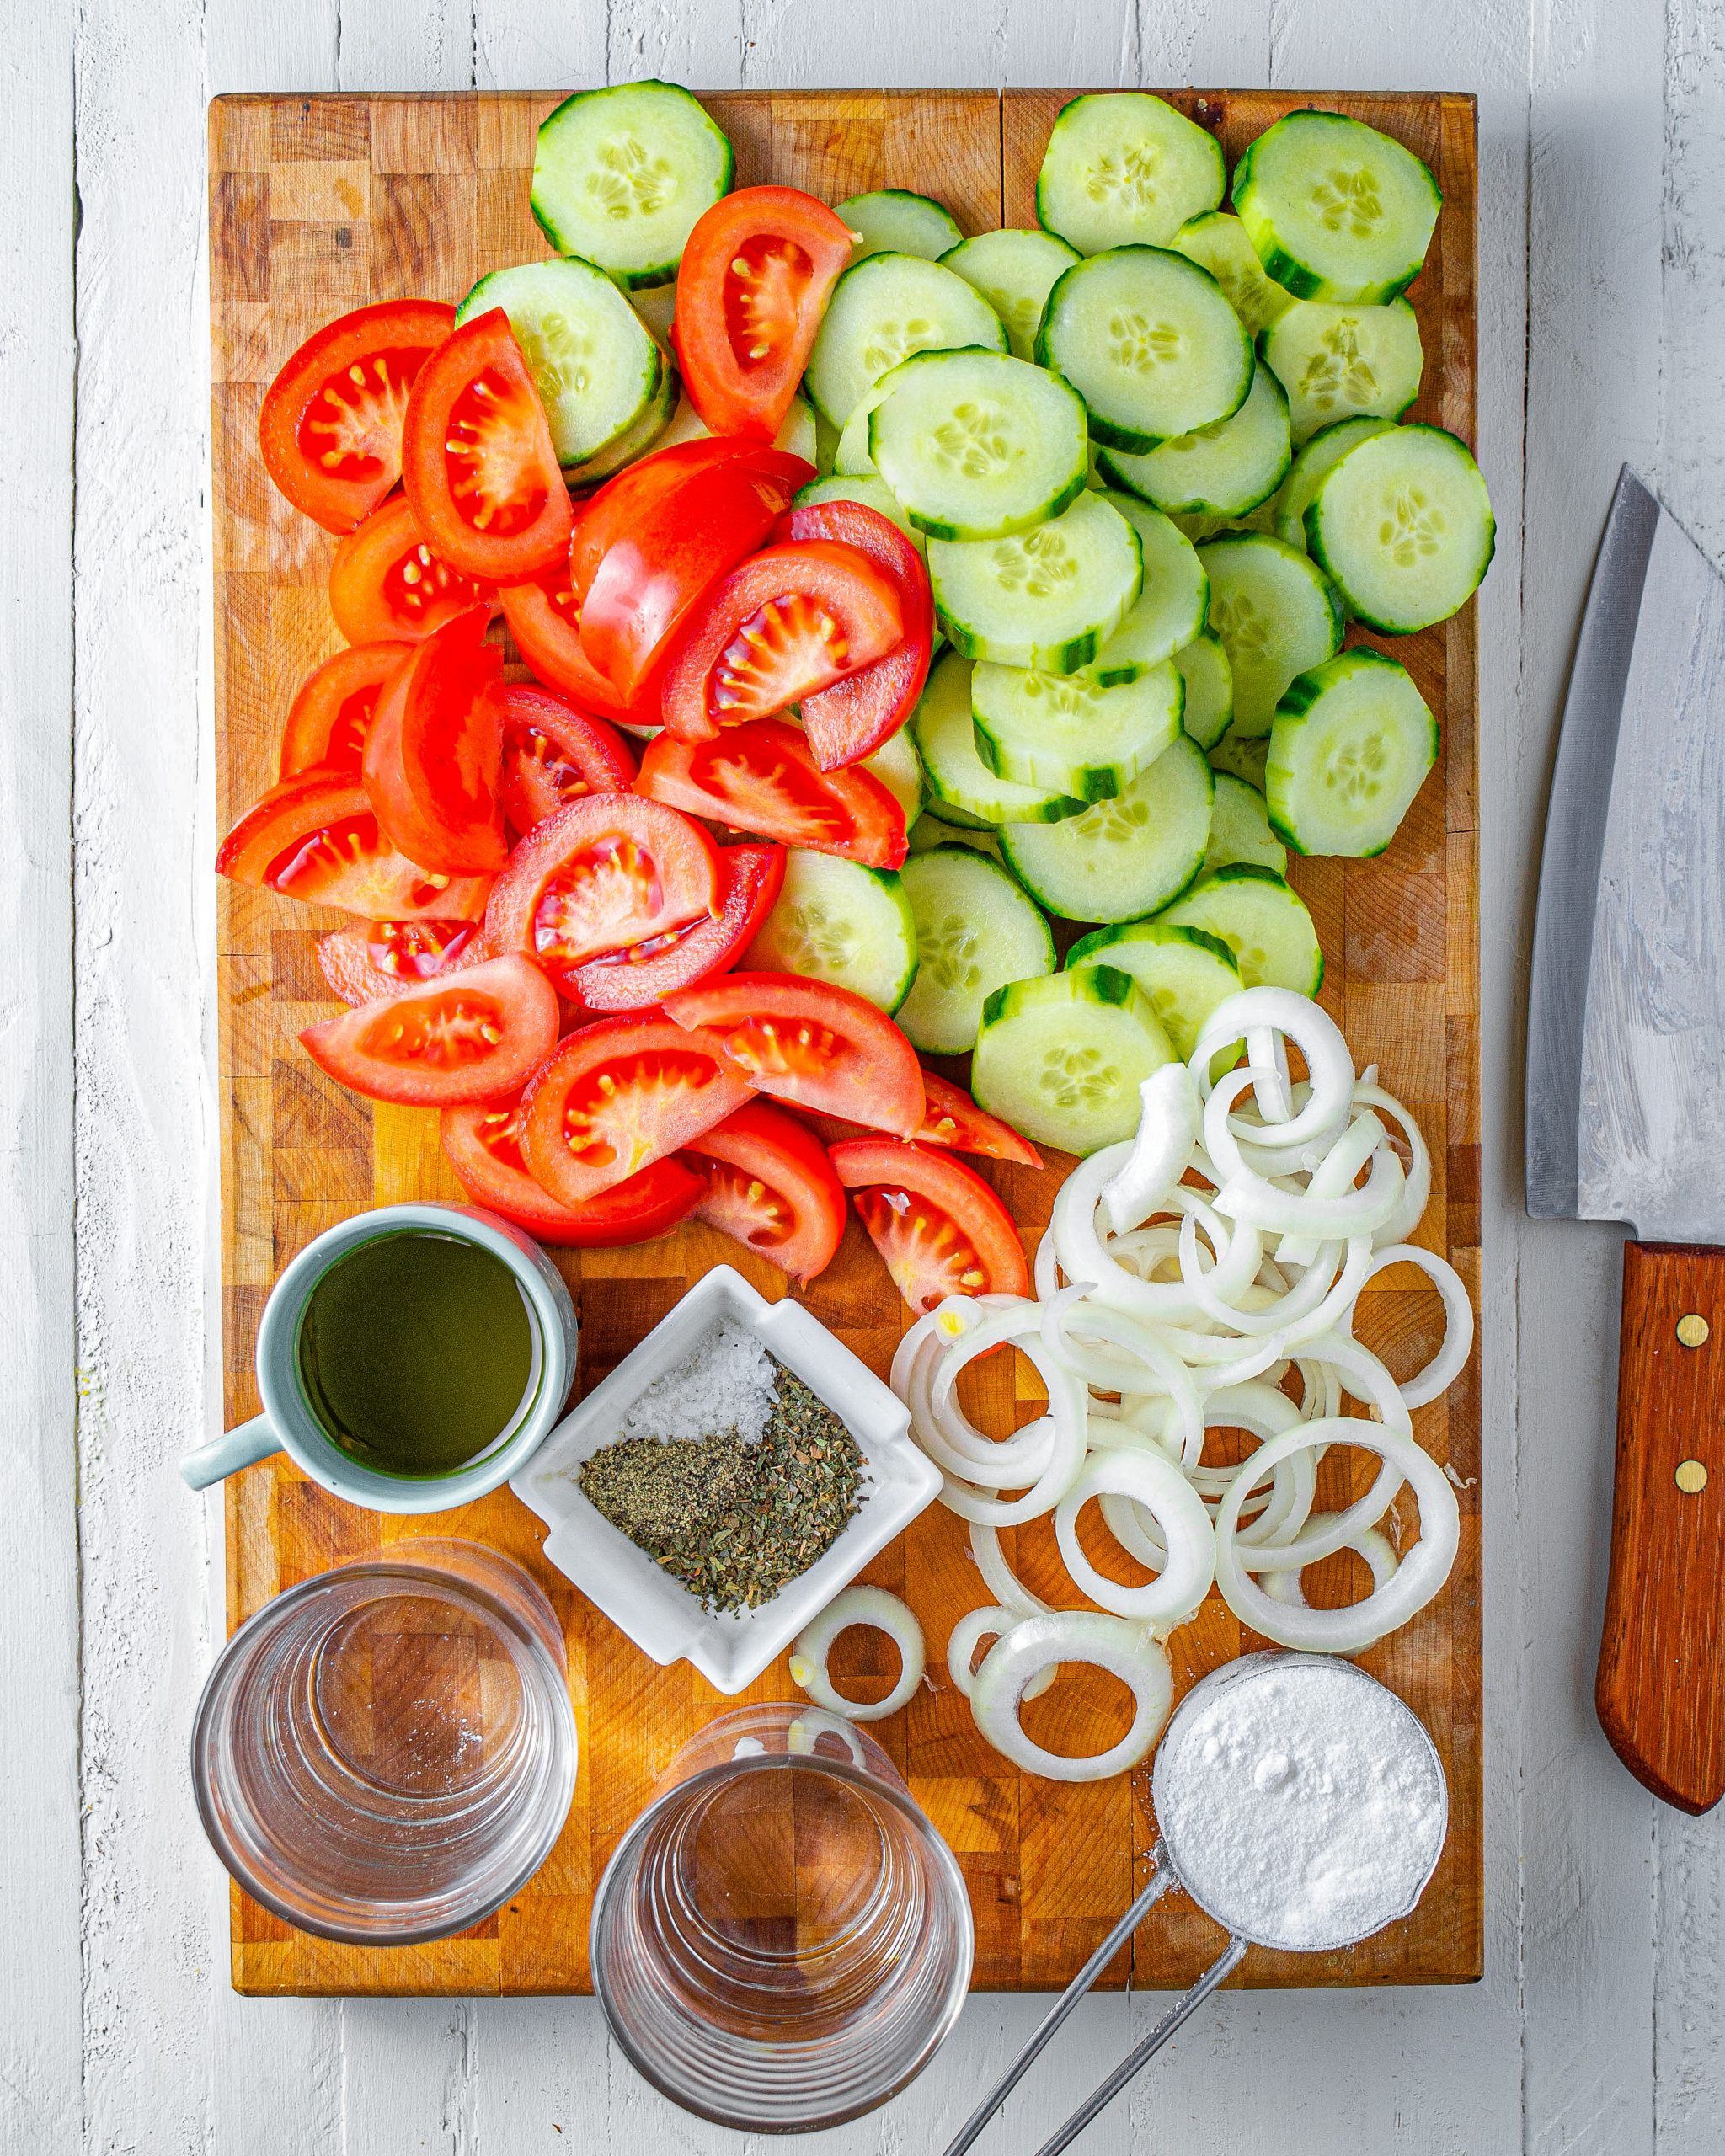 Marinated Cucumbers, Onions and Tomatoes Ingredients